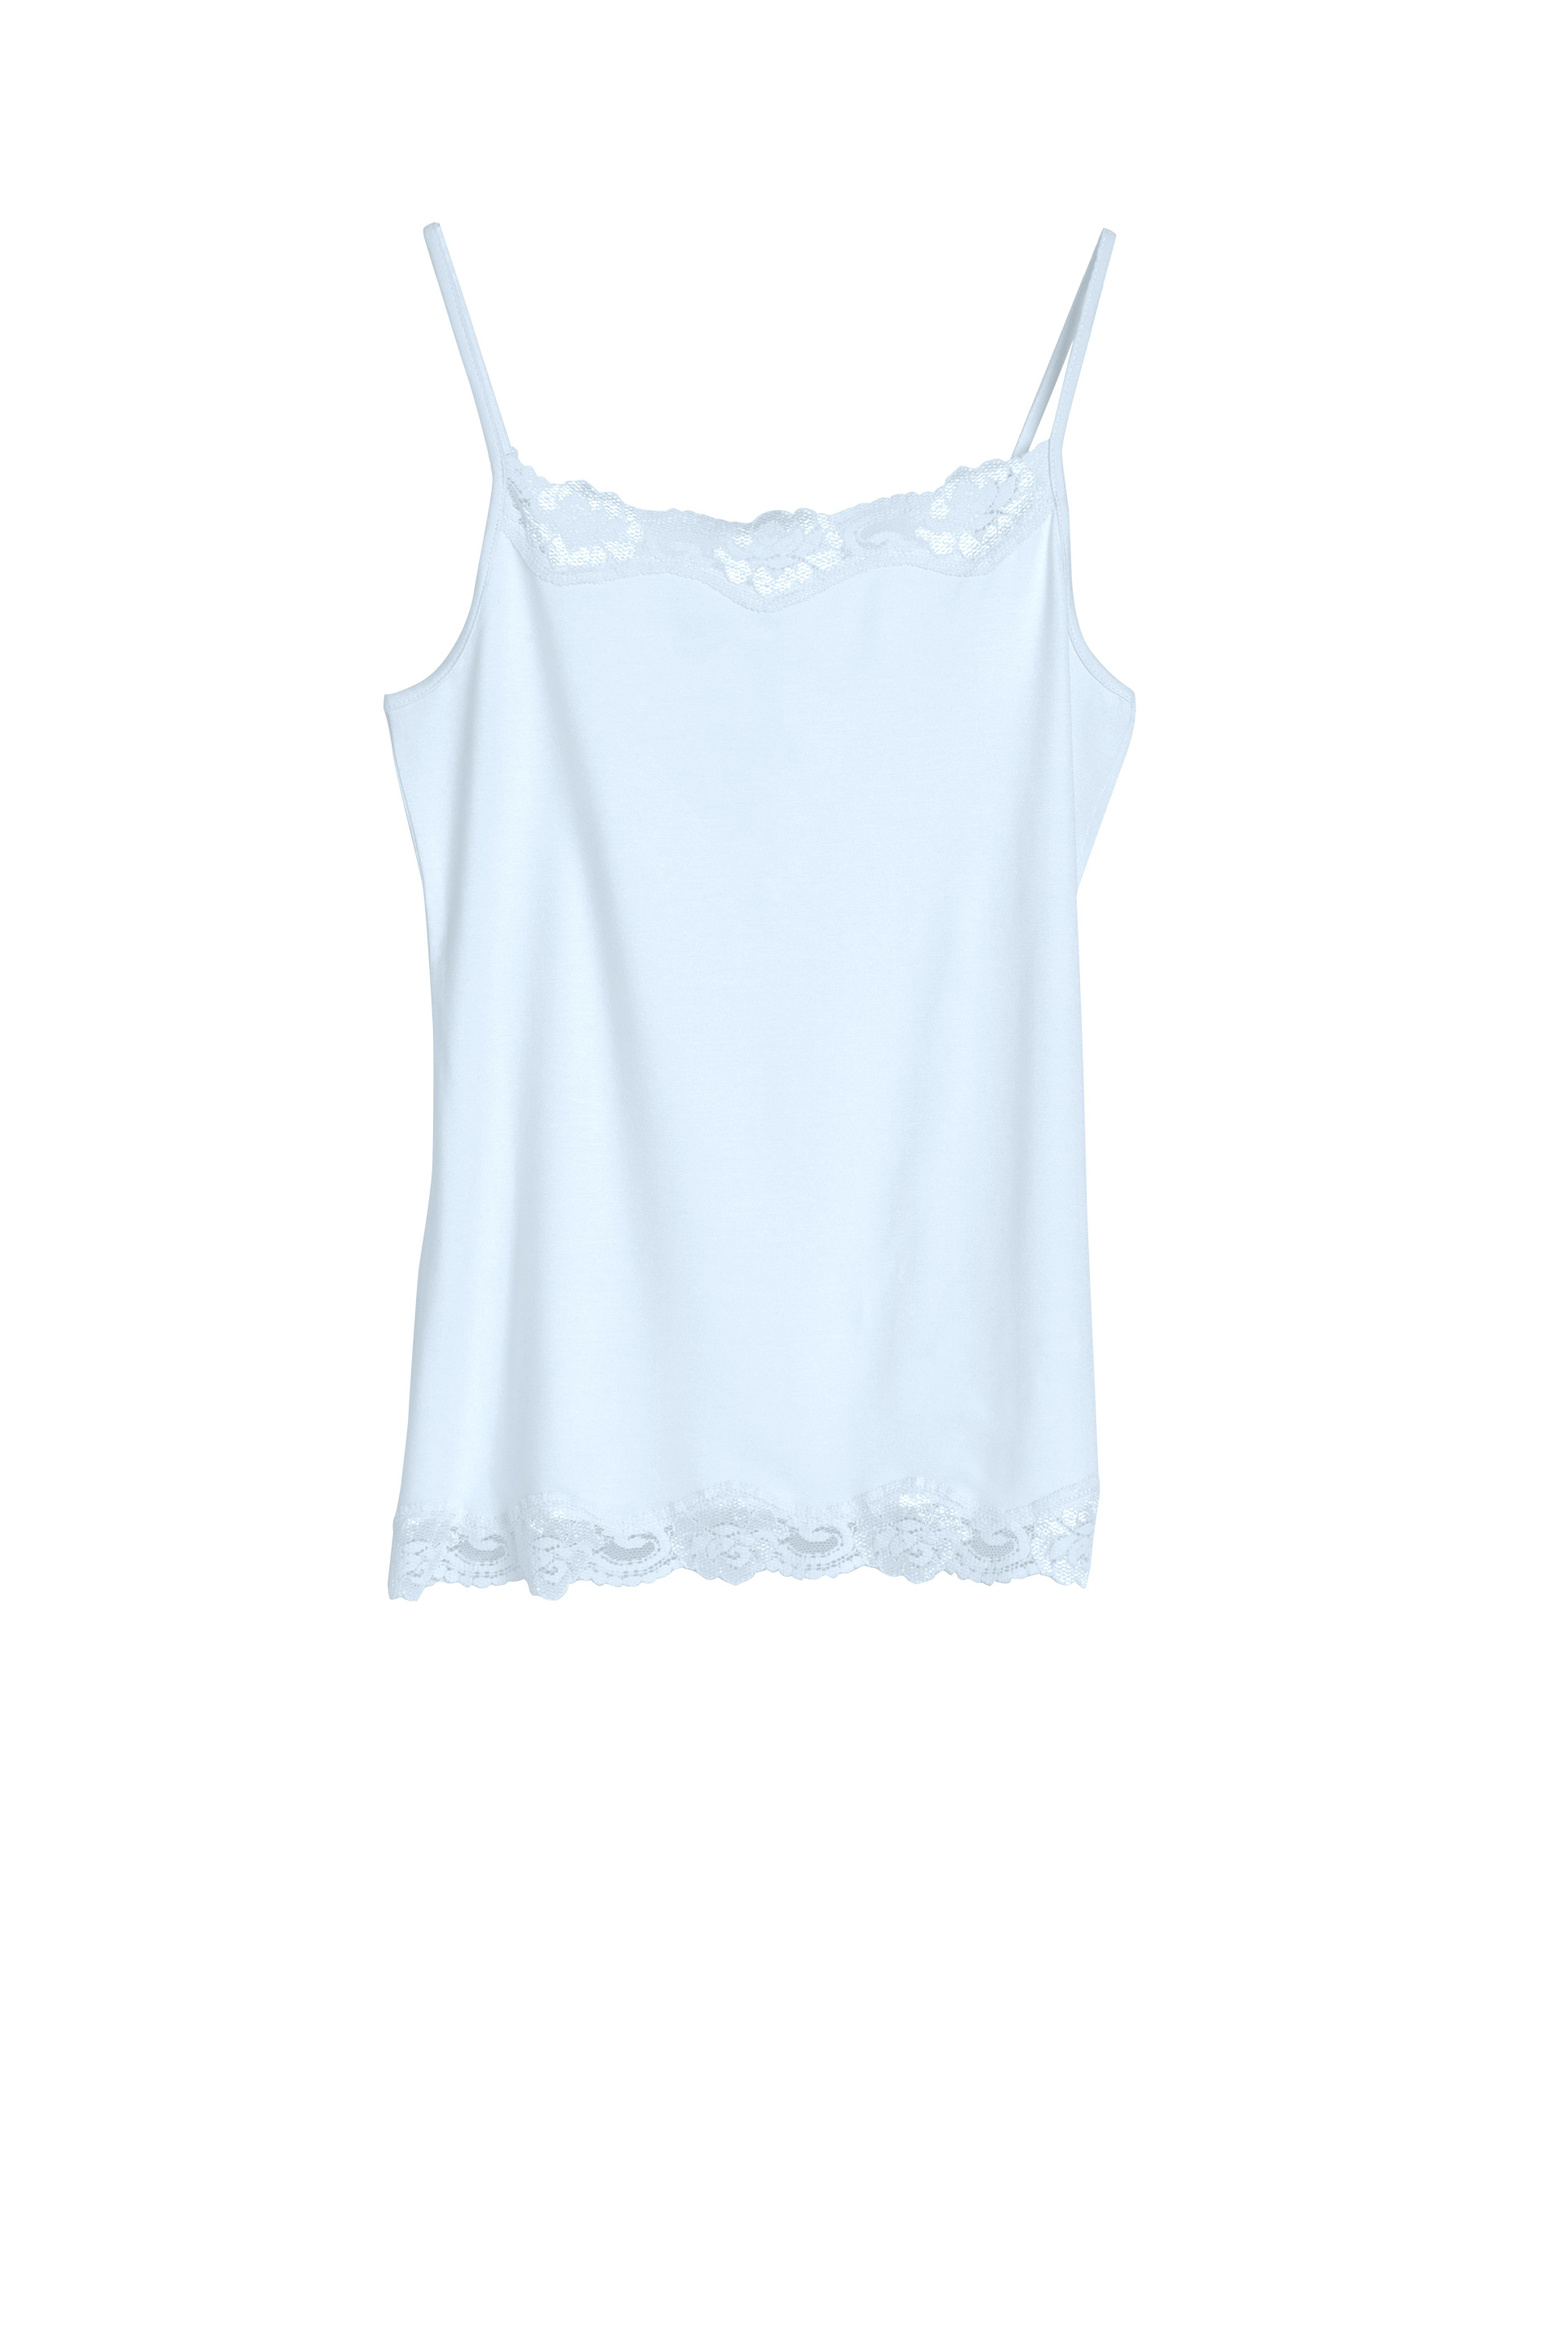 7200_lace_camisole_ice_blue_new.jpg